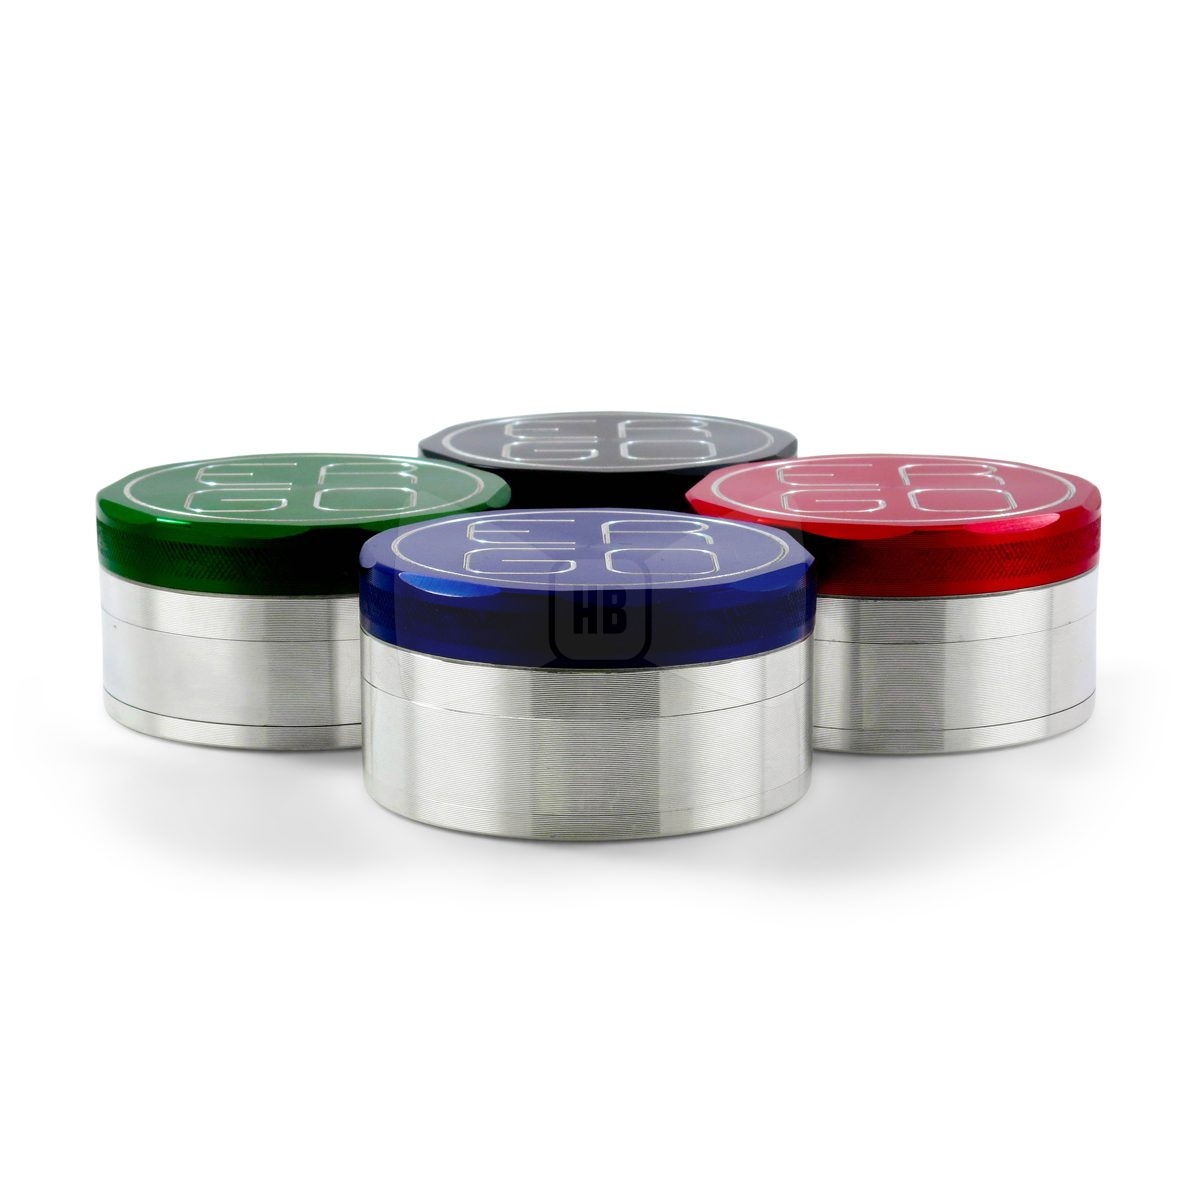 ERGO 4 Piece 90mm Grinder with Removable Screen Black